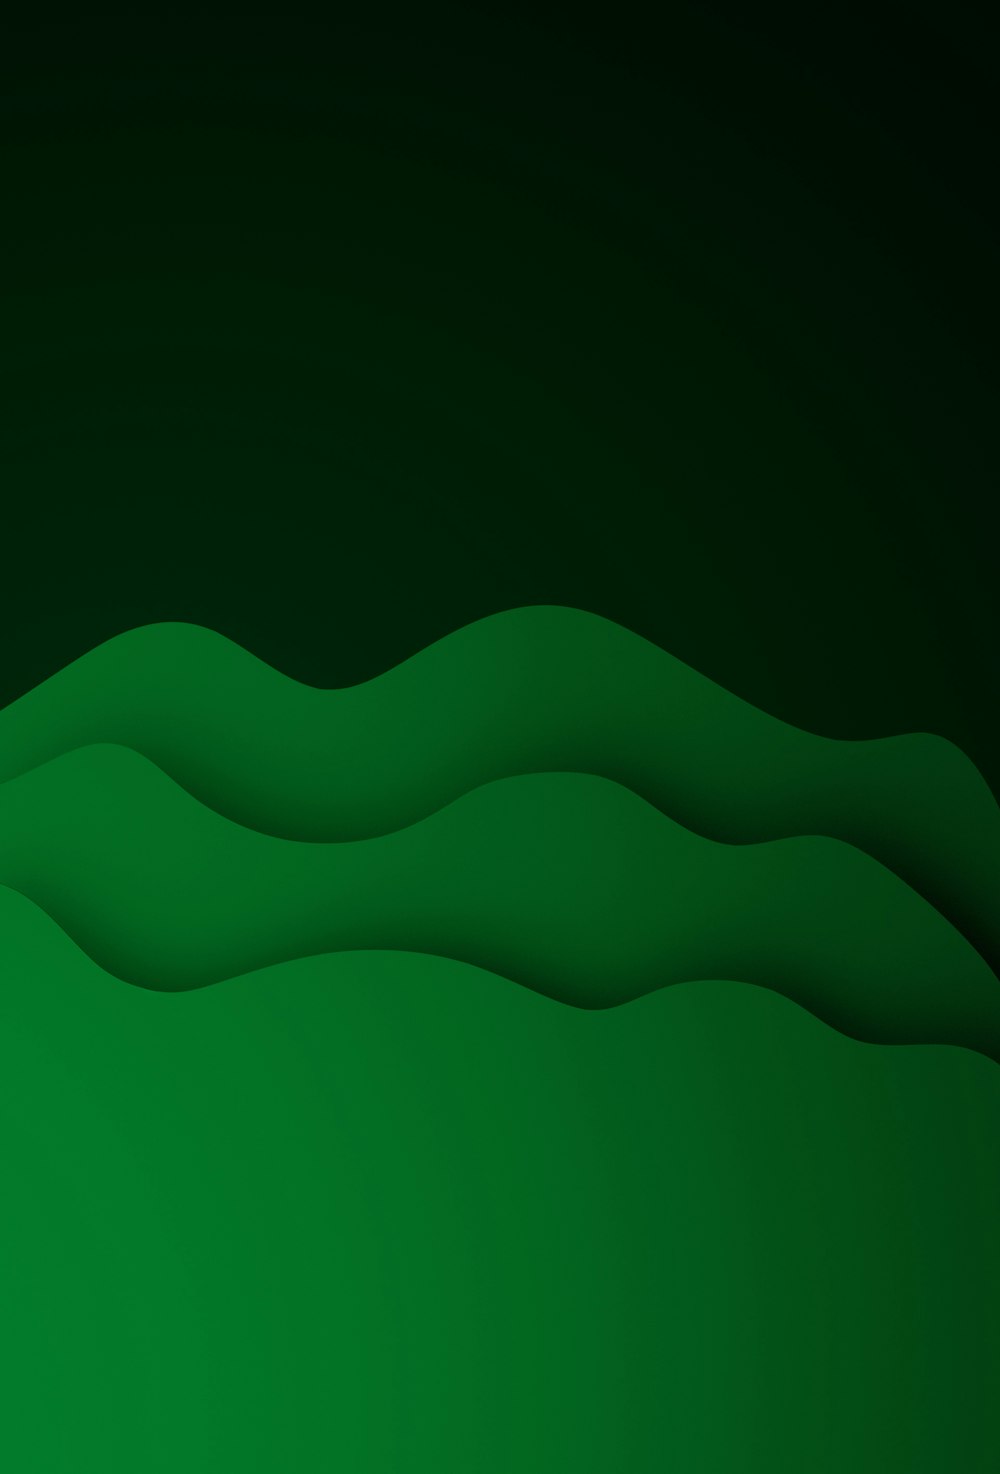 a green abstract background with wavy shapes